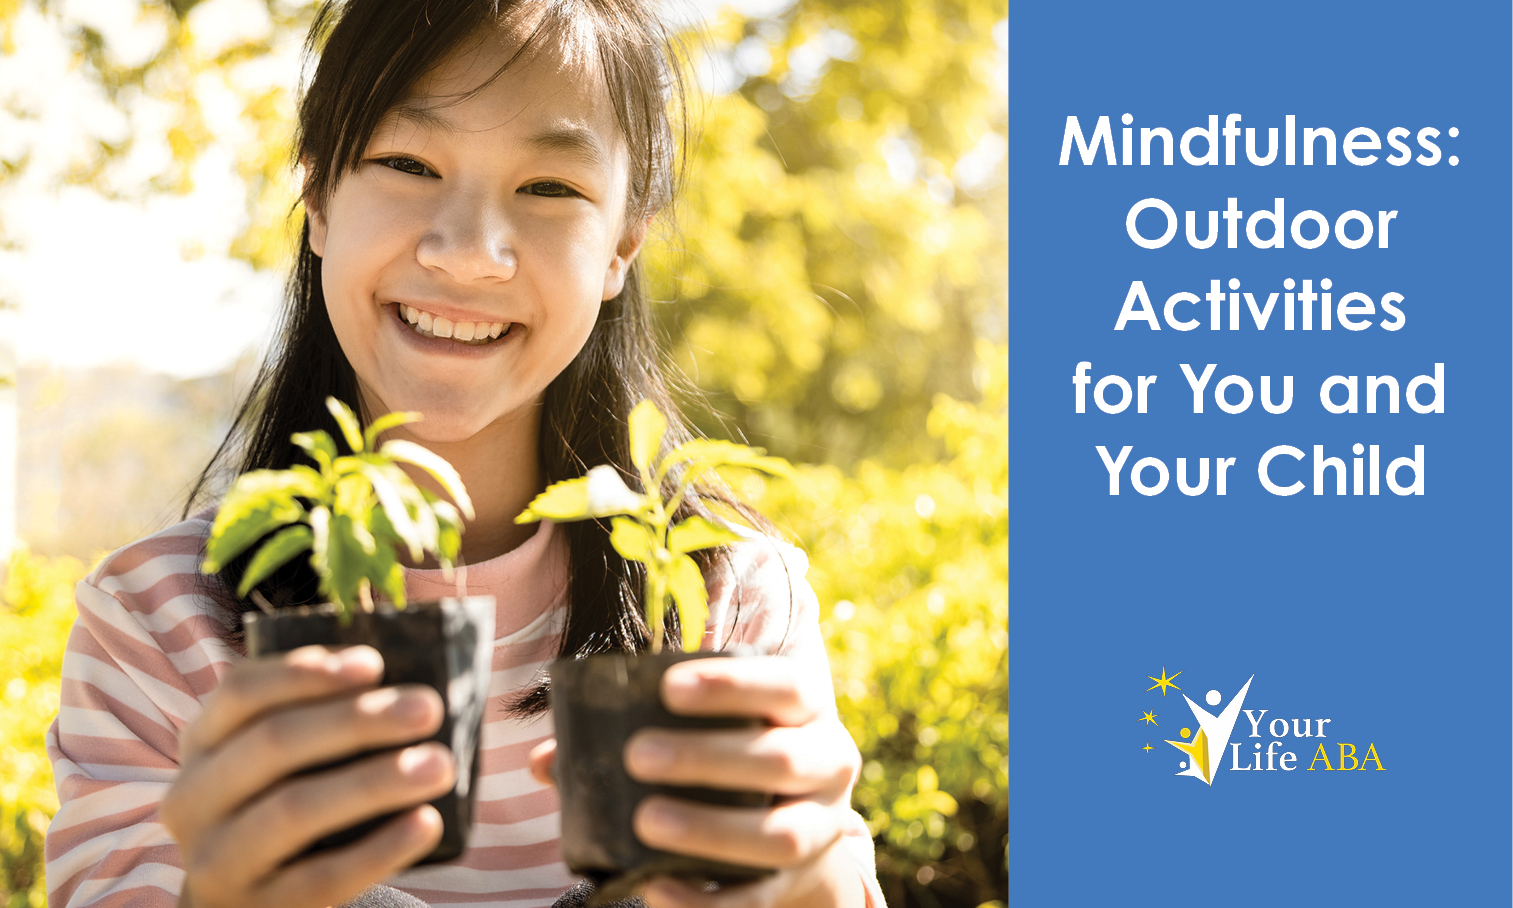 Mindfulness: Outdoor Activities for You and Your Child 